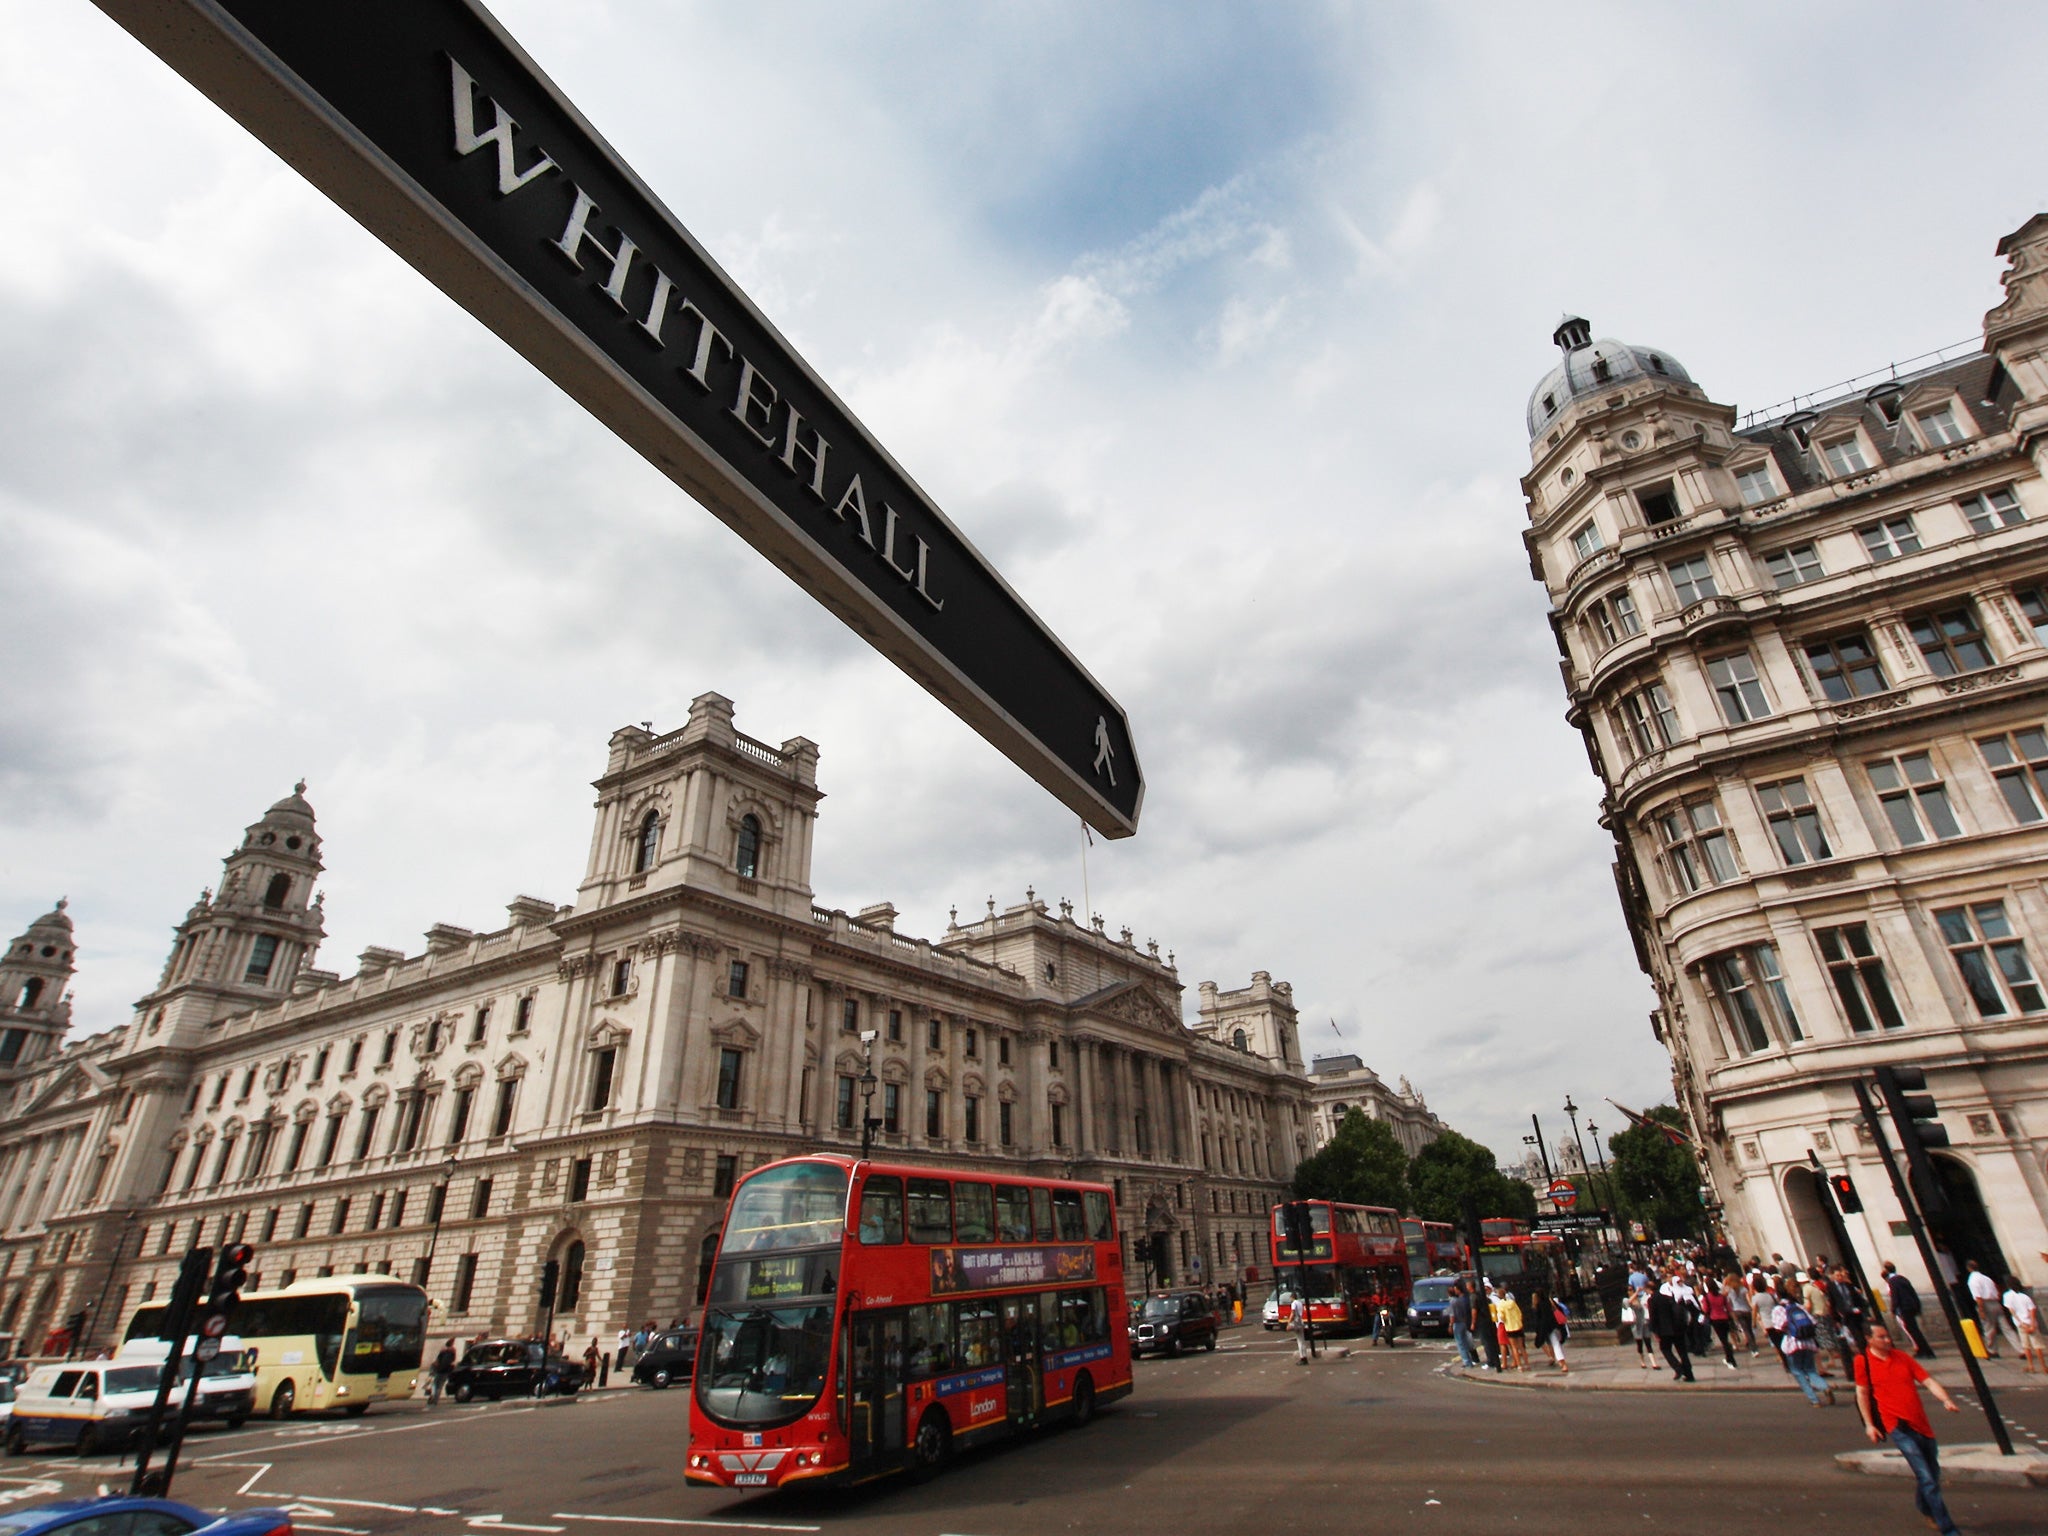 An “old boys network” runs Whitehall, according to a report